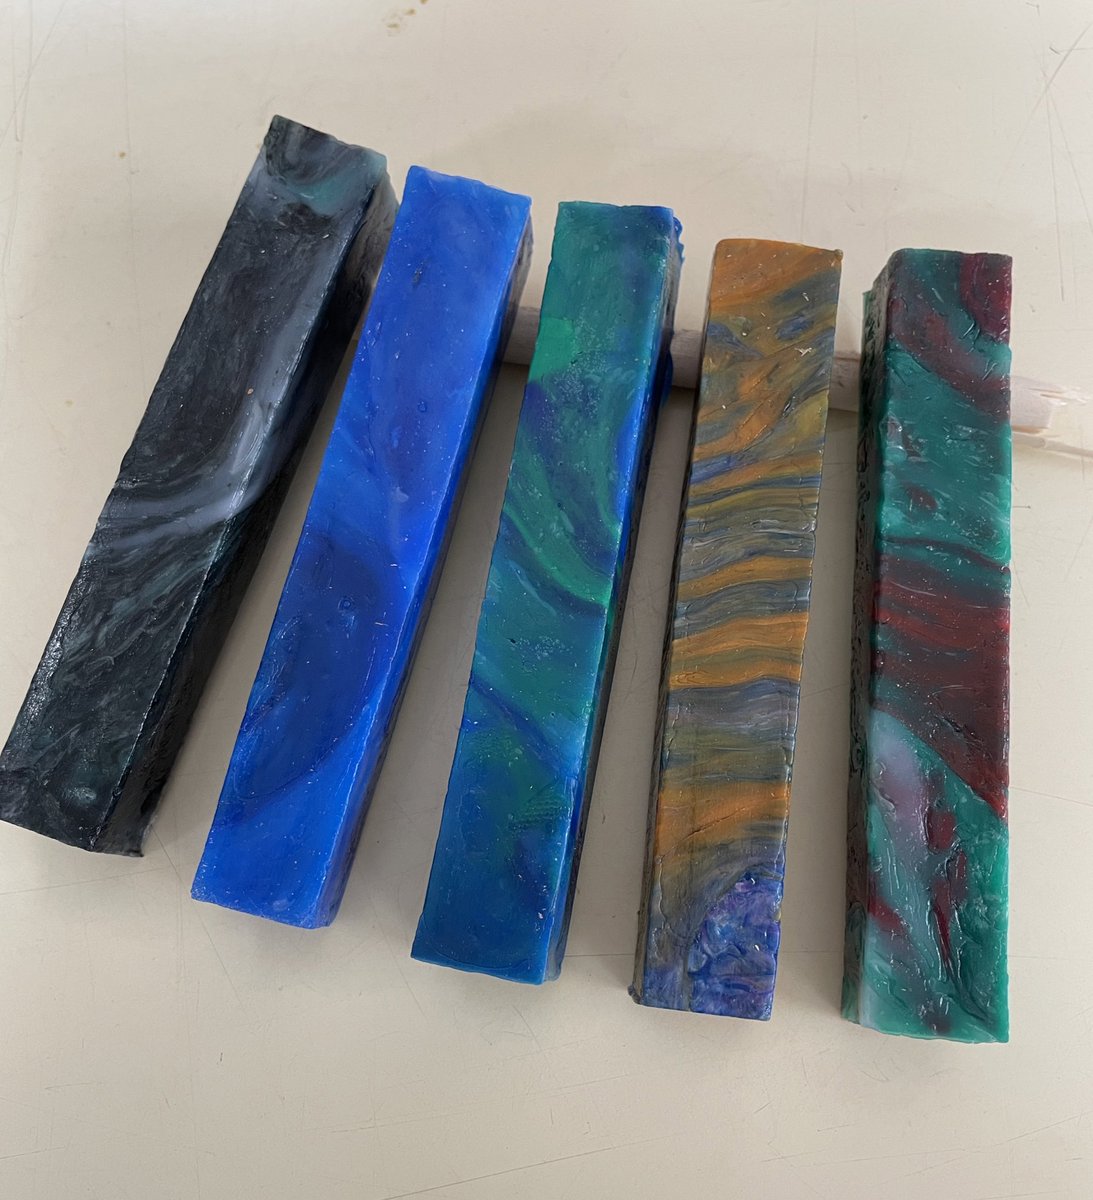 Five more pens blanks made up with HDPE collected in @montrose_acad! Will share the results later today…

#PreciousPlastic #RecycleReuseRethink